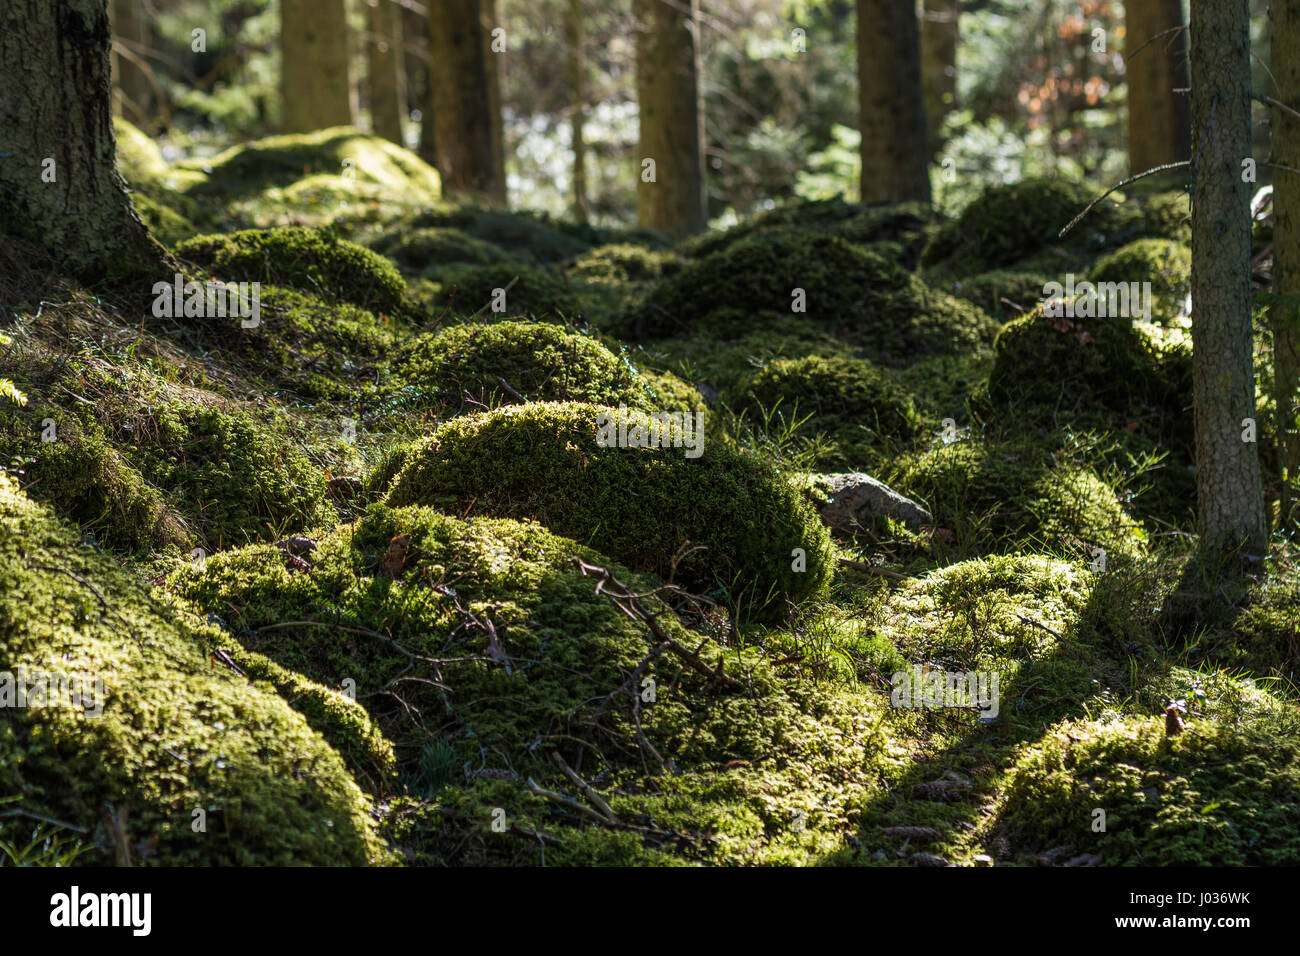 Untouched green moss grown ground in the forest Stock Photo